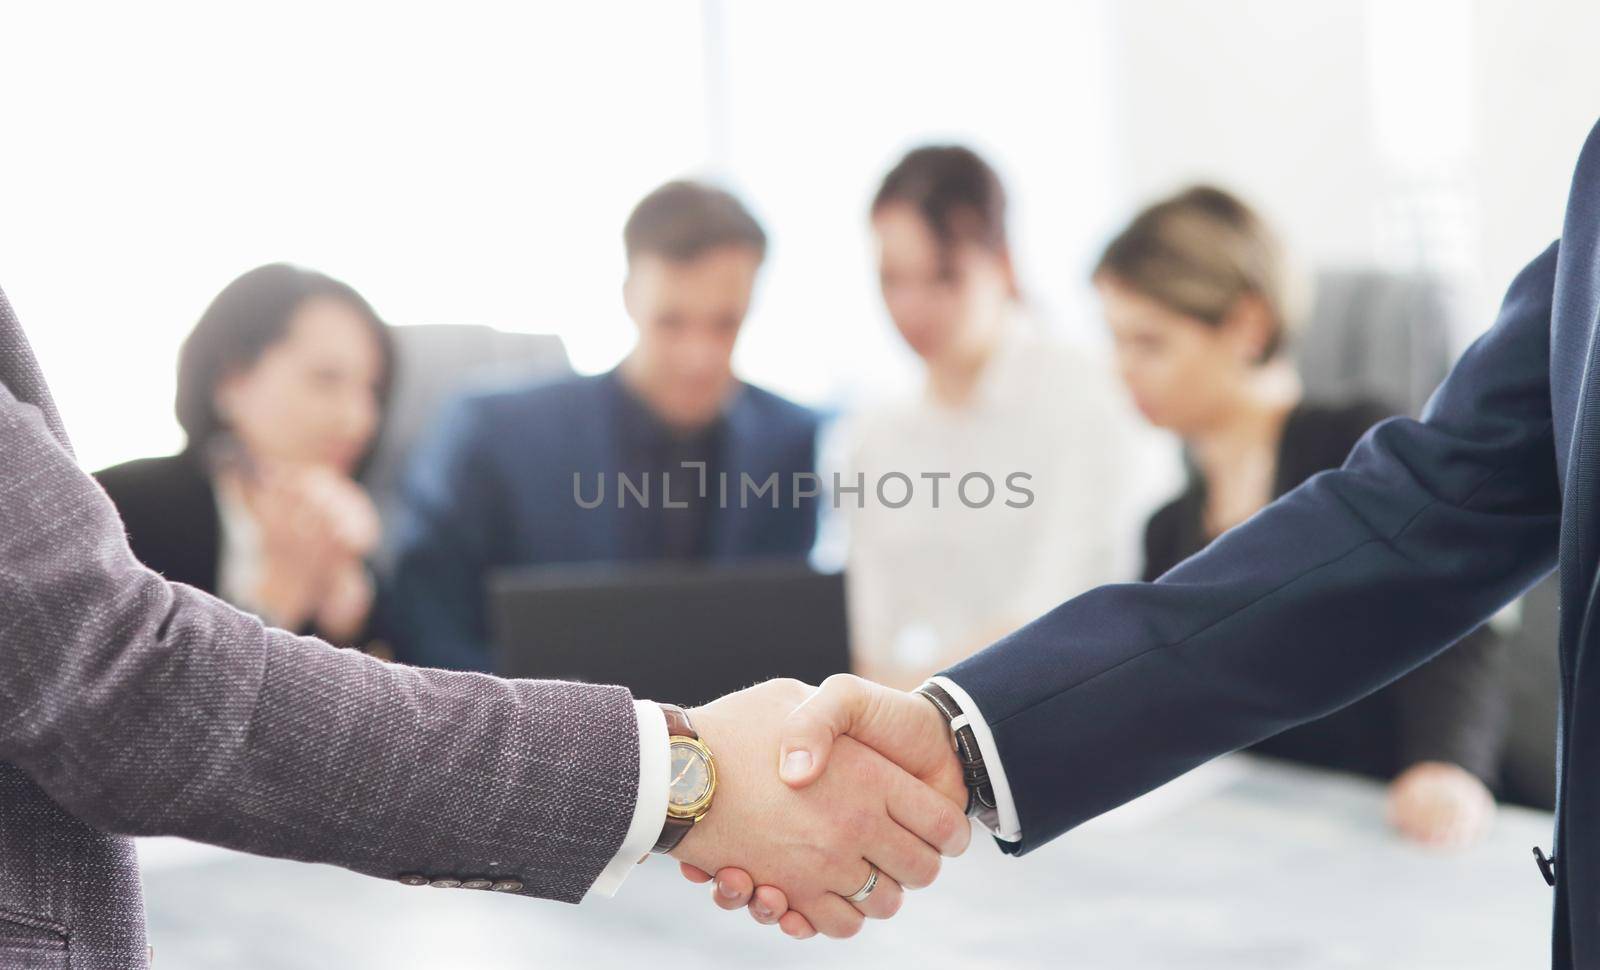 Business people shaking hands finishing a meeting in the background of their work team by selinsmo